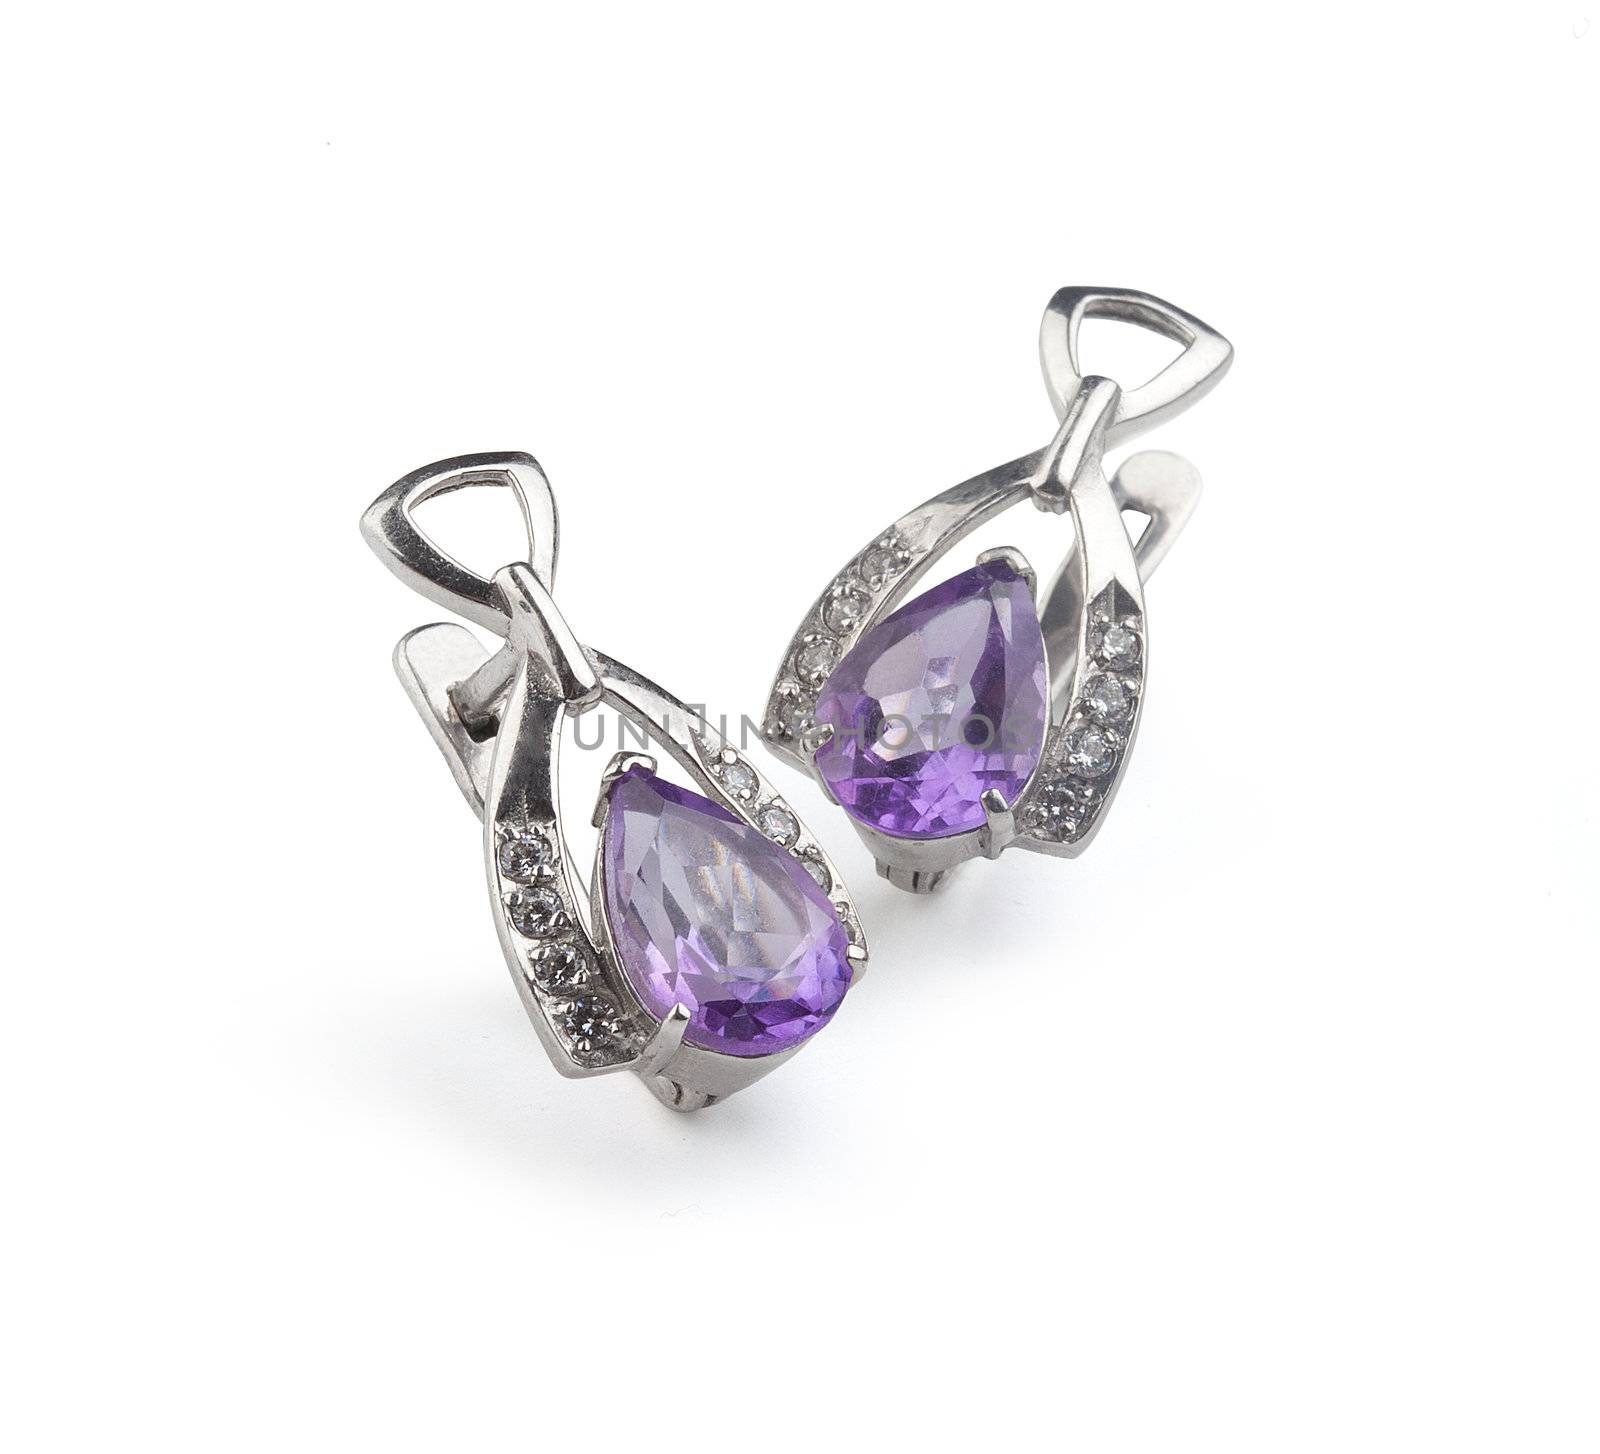 Silver ear-ring with amethyst on the white background